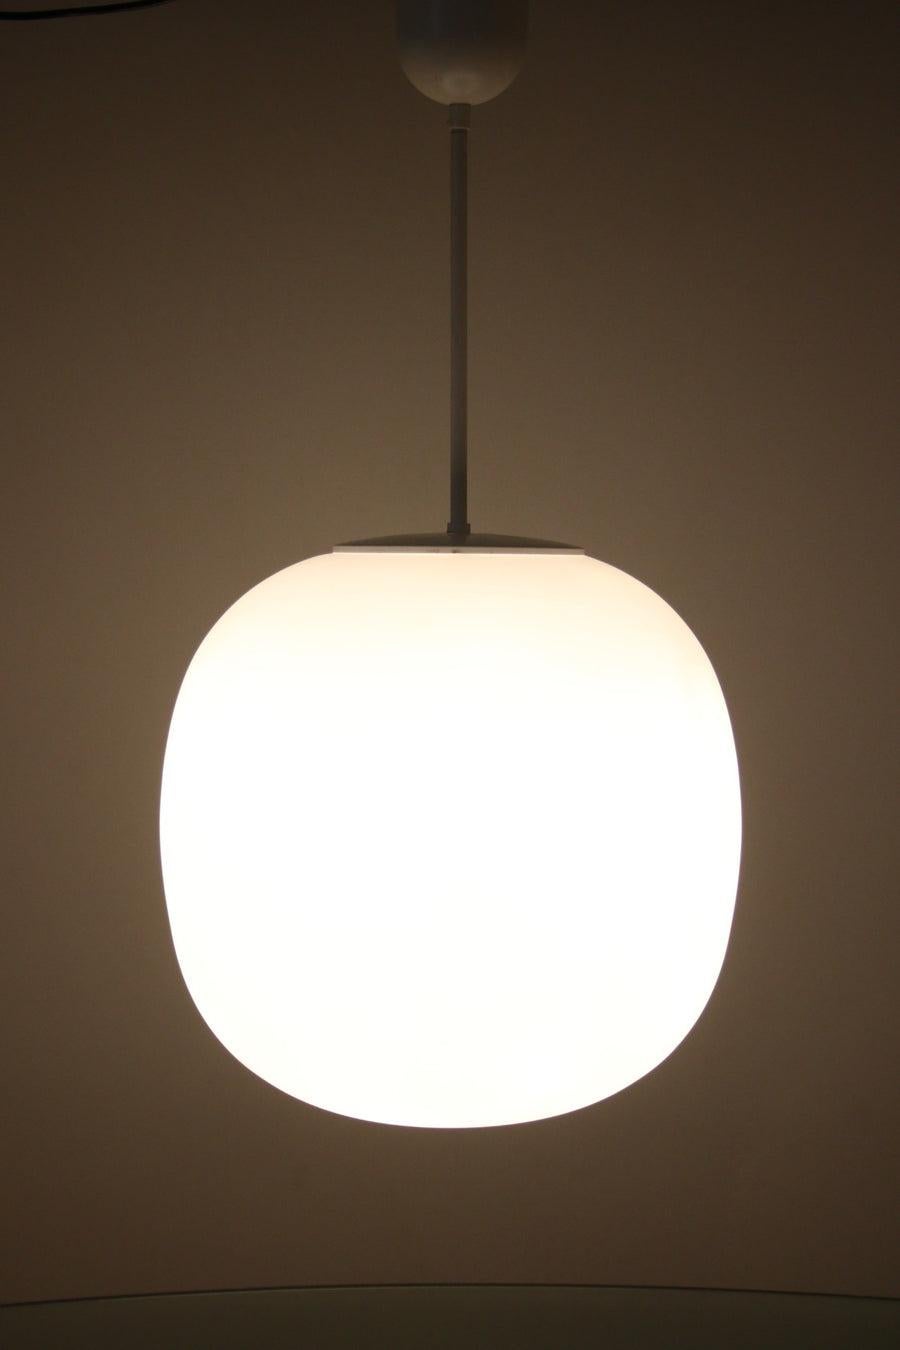 Very Large White Glass Bulb Lamp Glashutte Limburg, 1960

A very LARGE white ball hanging lamp made by Glashutte Limburg in the 1960s.

The lamp has 2 R27 fittings with 2 LEB lights in it

This can be seen in the photos, but due to traffic light,